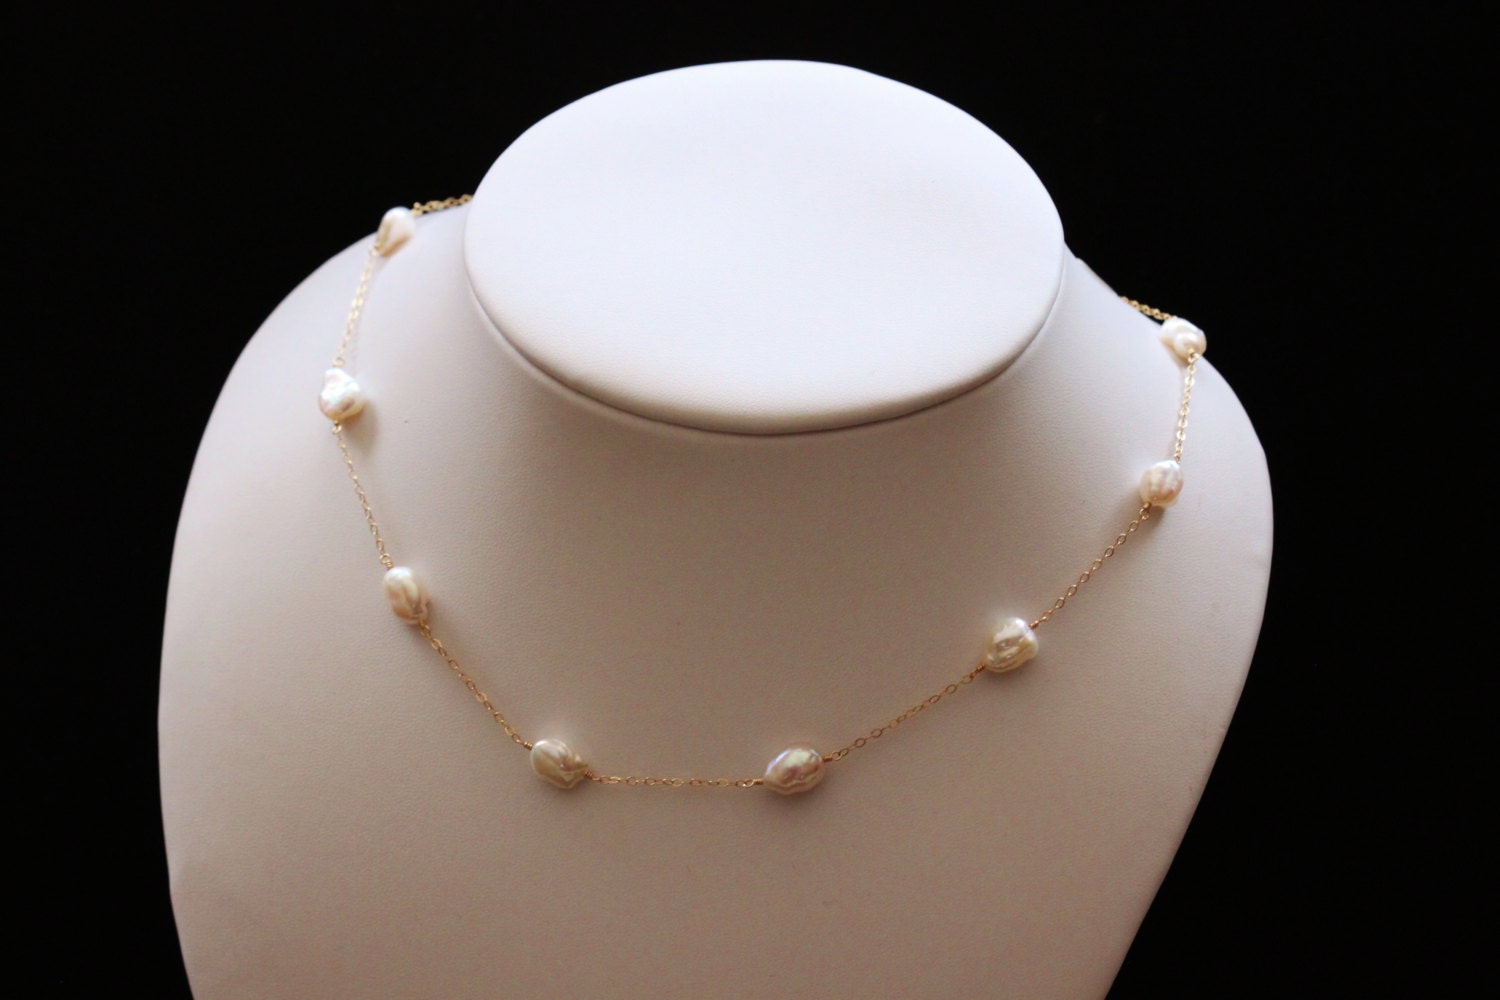 Keshi Keishi Pearl Necklace 14k Gold Filled Tin Cup - Etsy